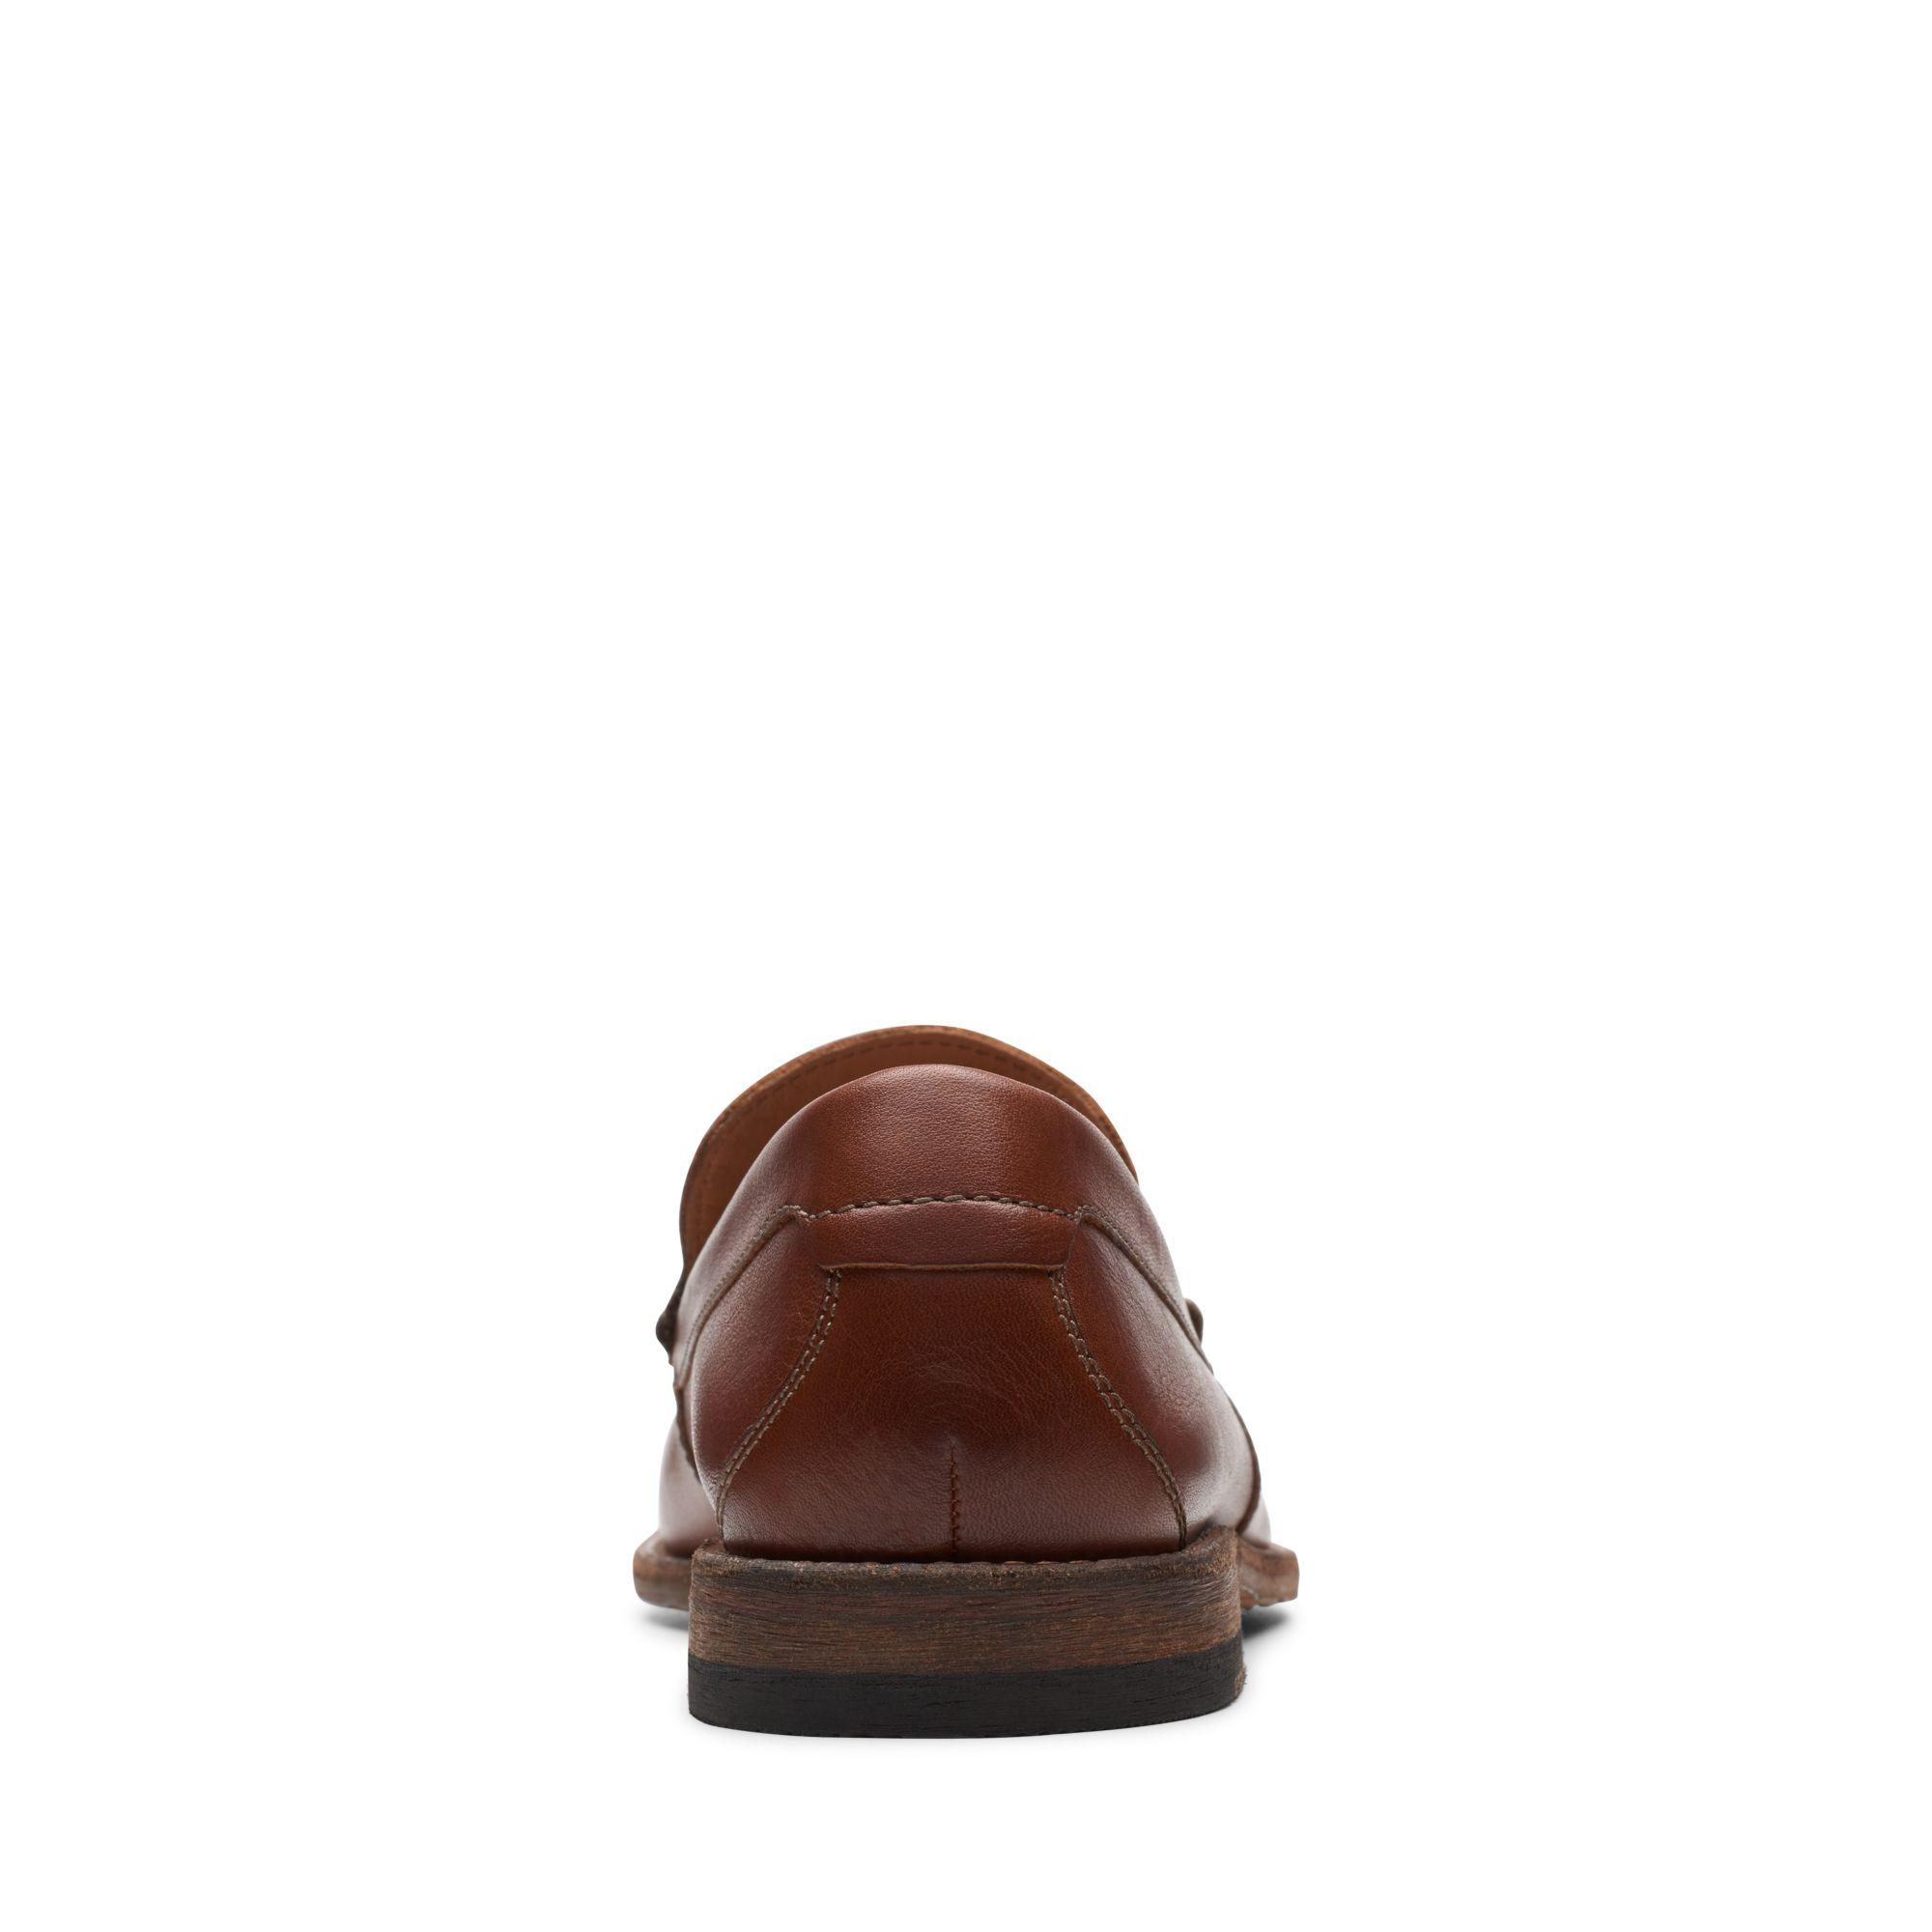 Clarks Leather Pace Barnes in Dark Tan Leather (Brown) for Men - Lyst